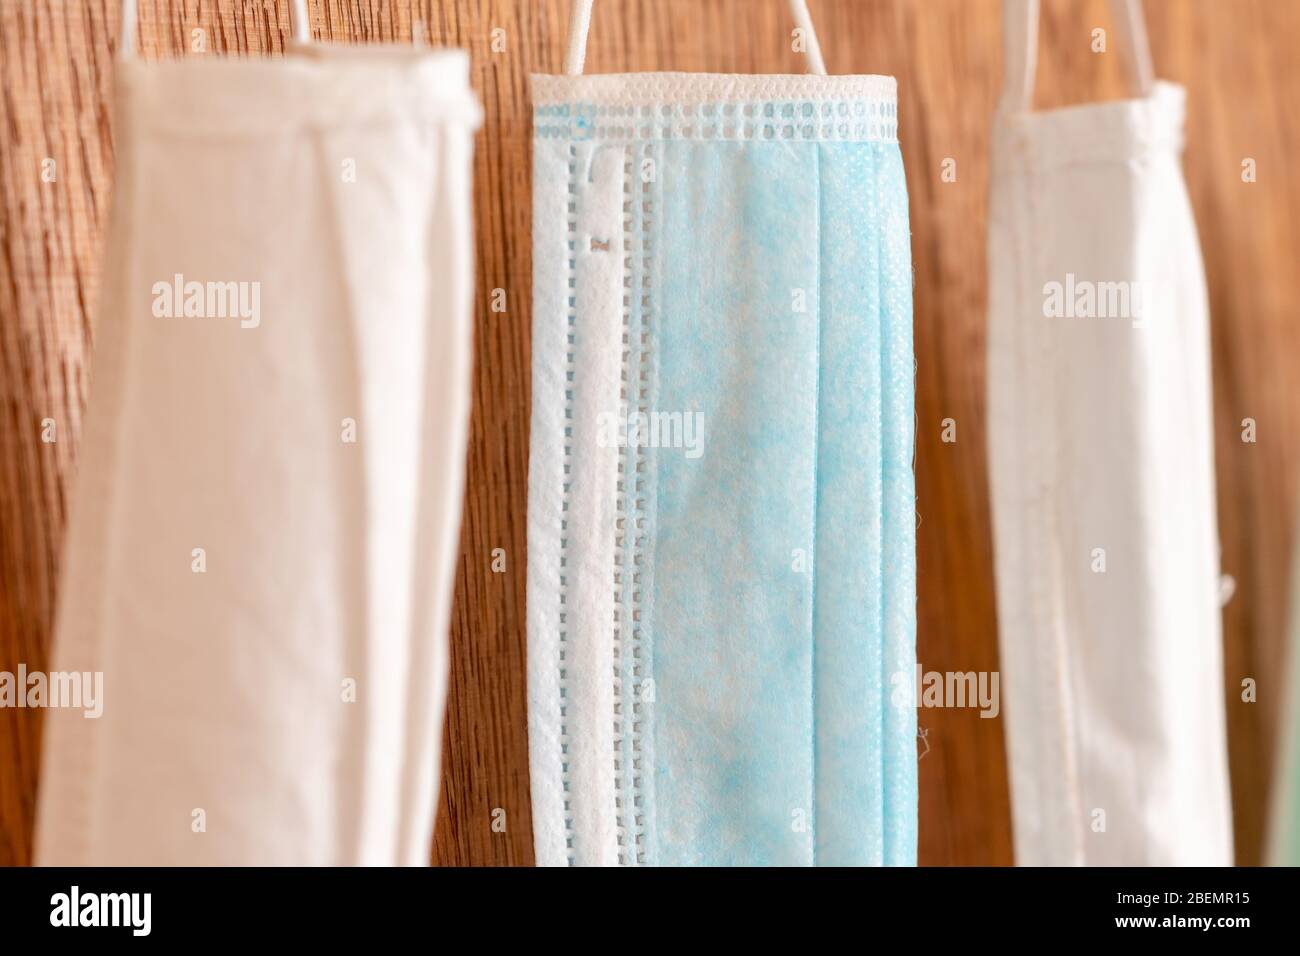 medical masks hanging in row close up background for protection from virus covid-19 coronavirus Stock Photo